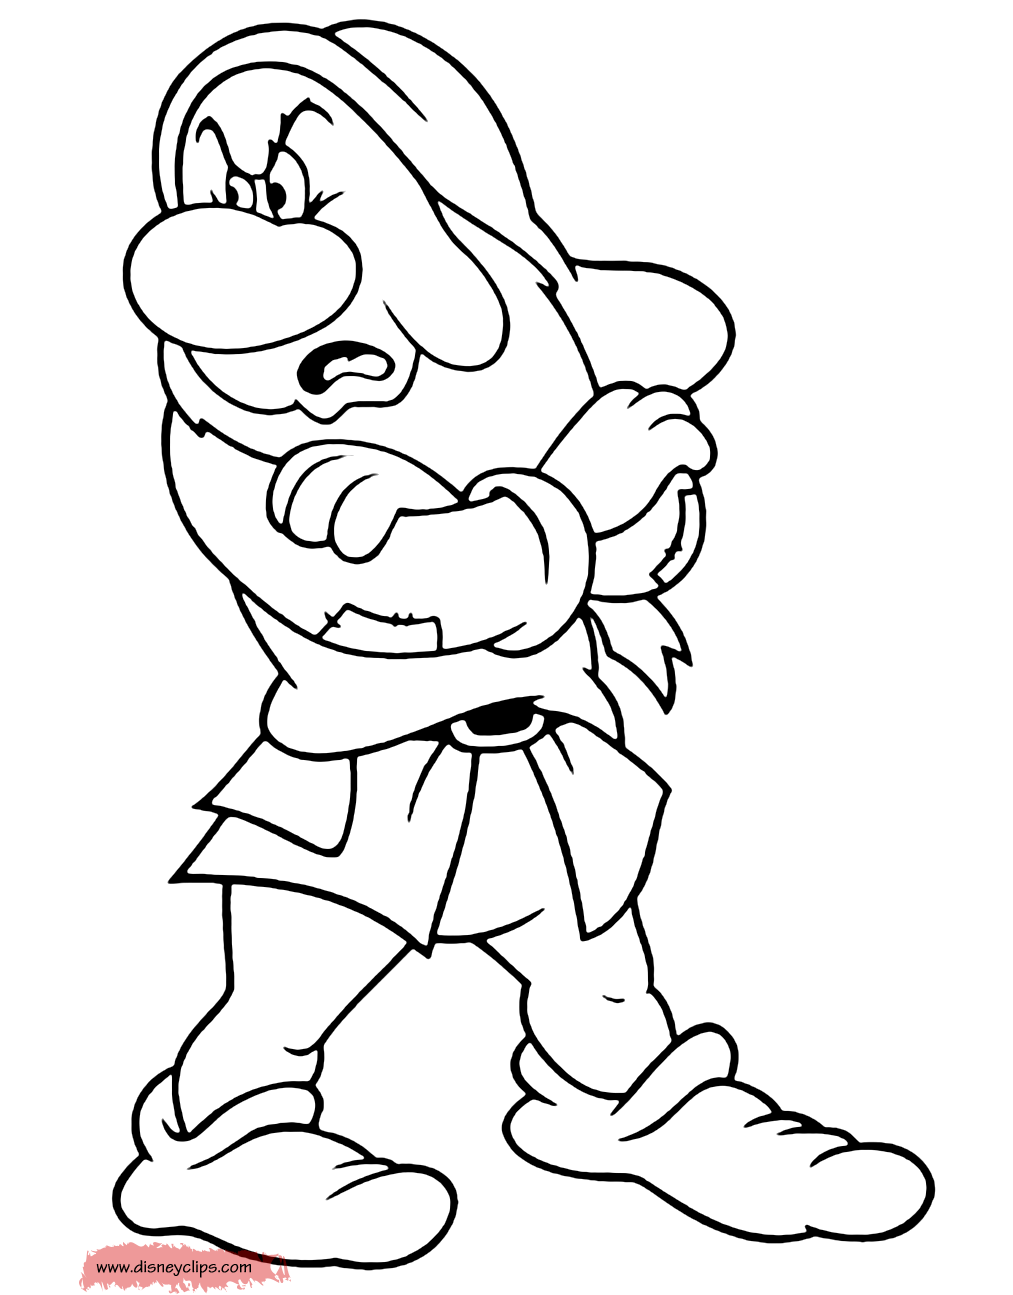 coloring page Grumpy with crossed arms